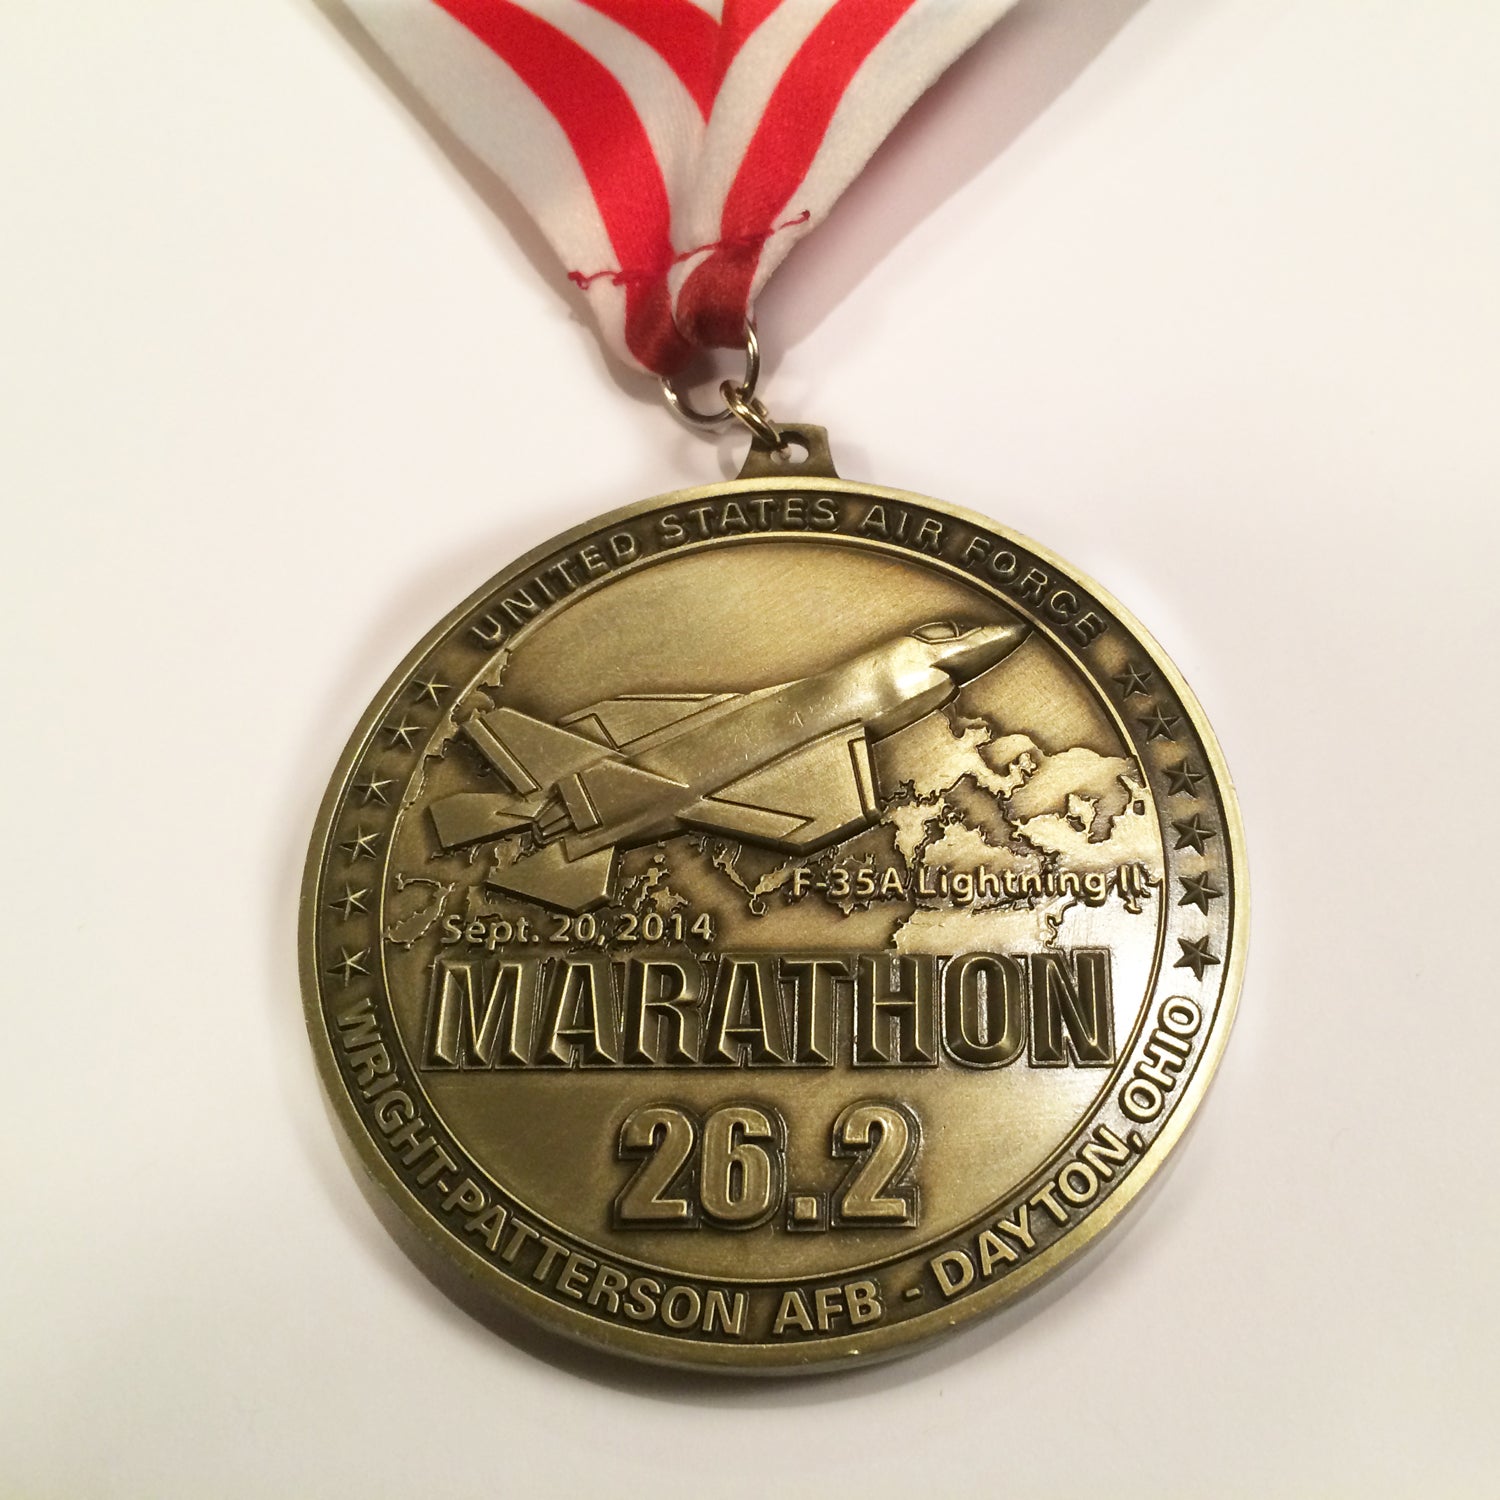 Solera: Nothing says raw power like a fighter jet. Every year, the Air Force Marathon features a different military plane on its medal and promotional materials, and every year the medal is a crowd favorite.